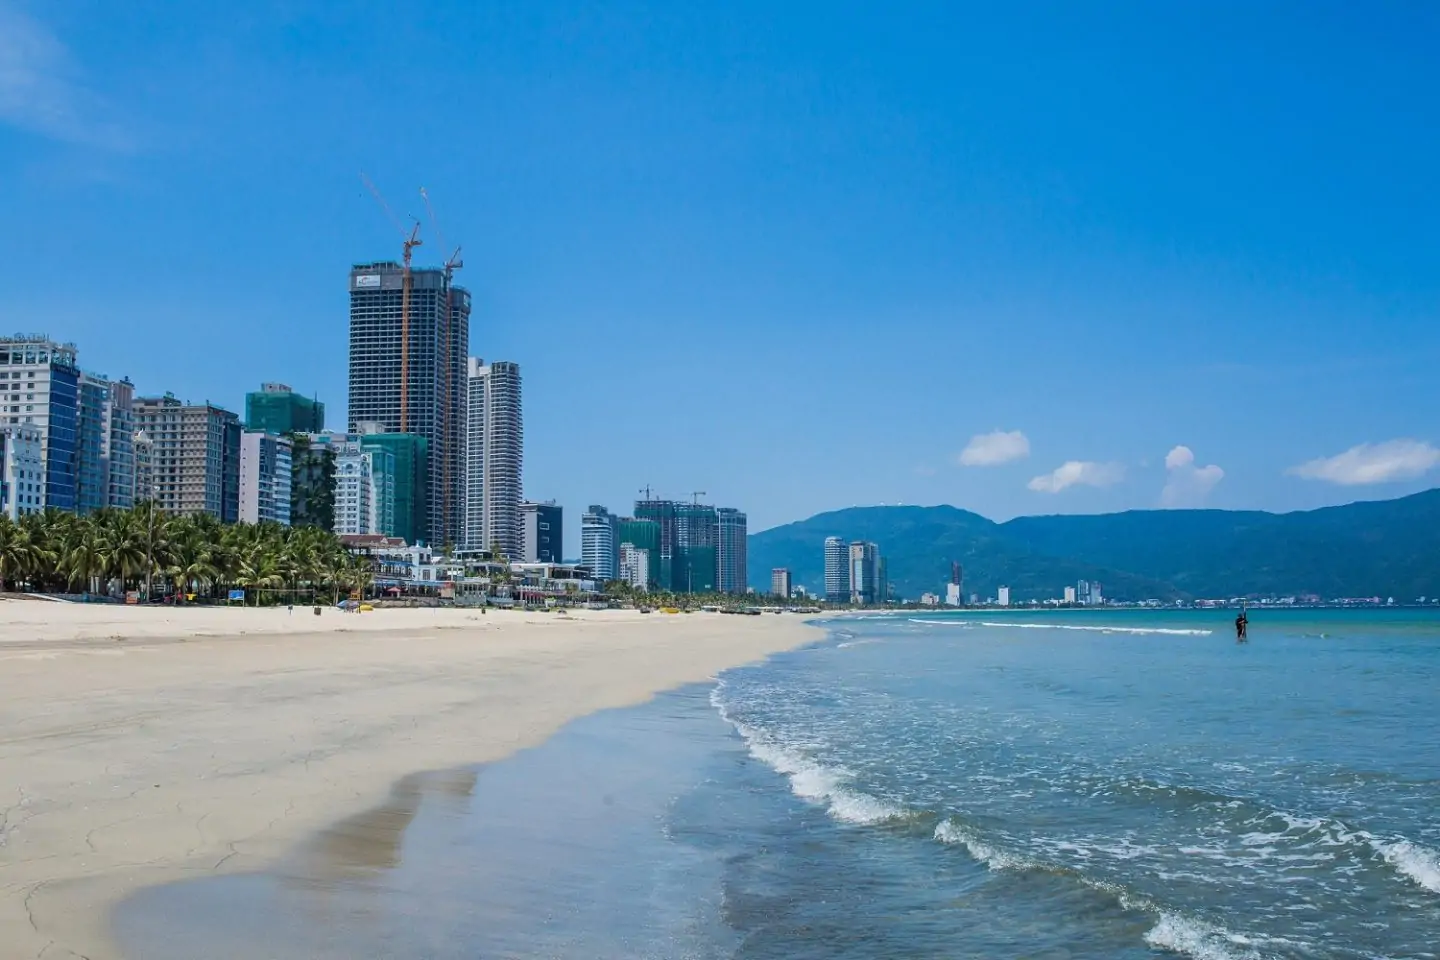 Top 7 Most Beautiful Danang Beaches For Tourists